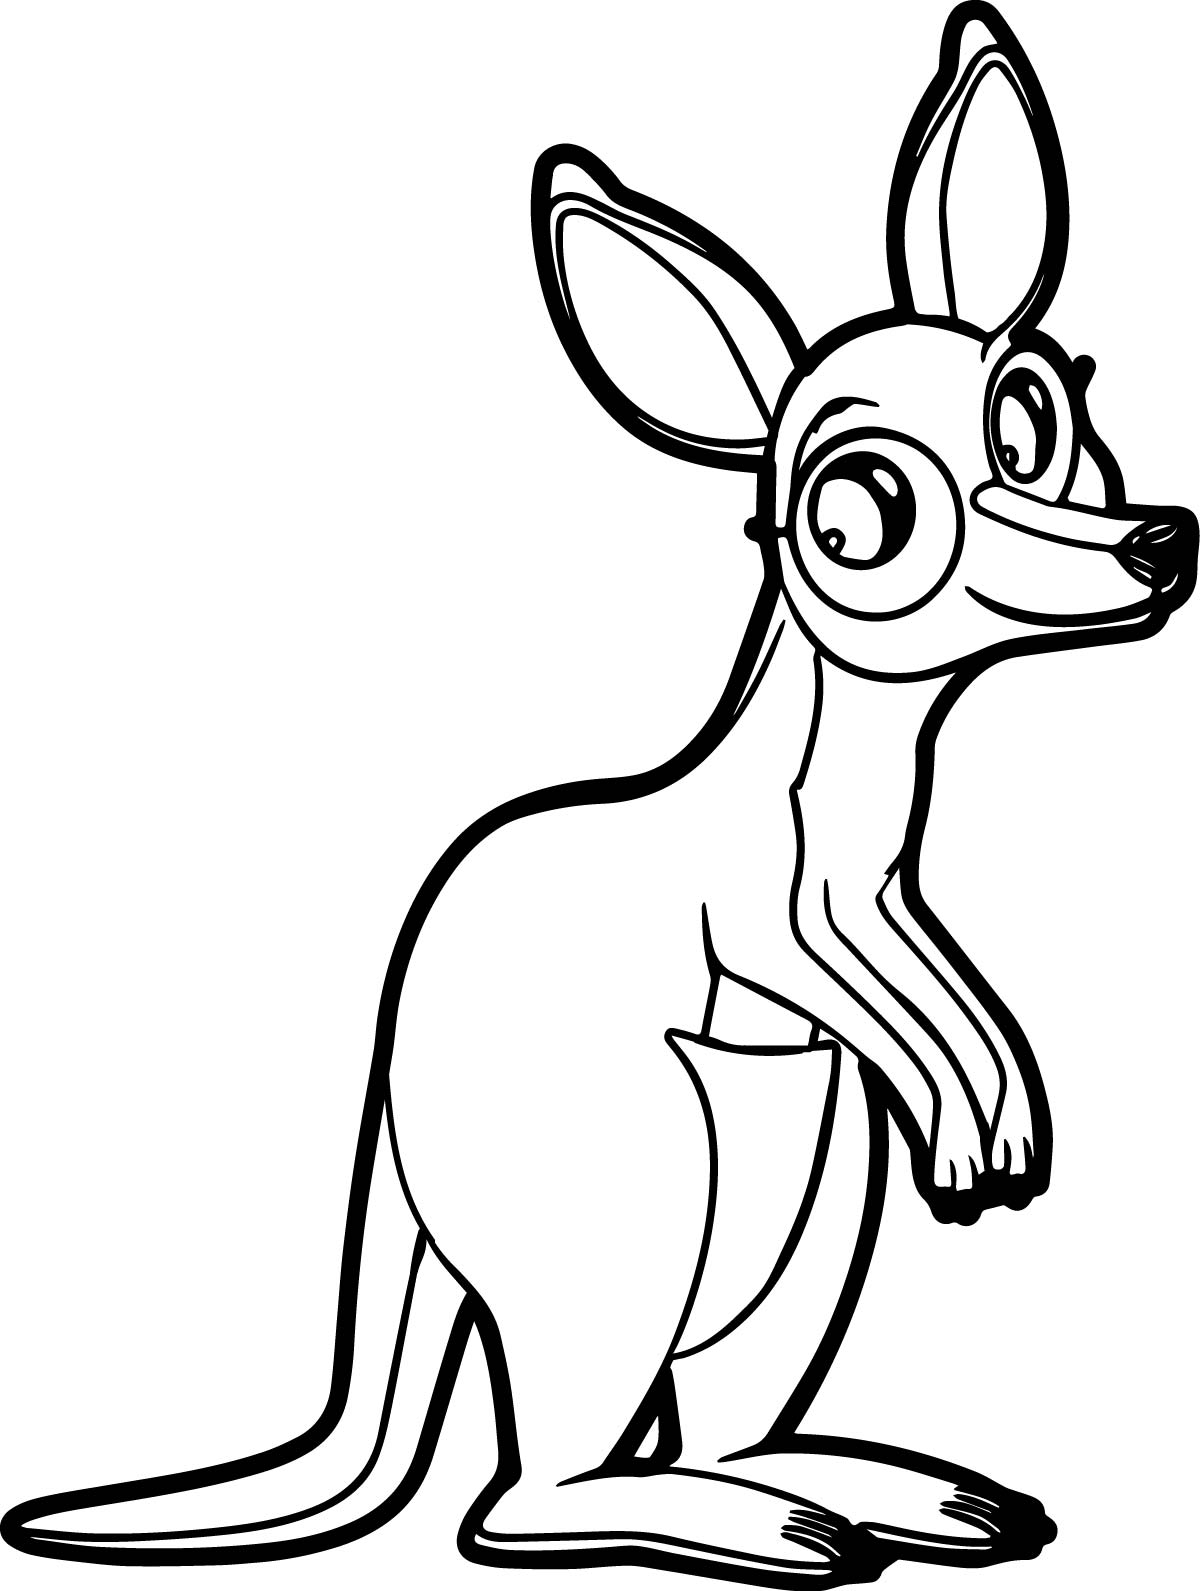 Kangaroo Coloring Pages For Kids at GetColorings.com | Free printable